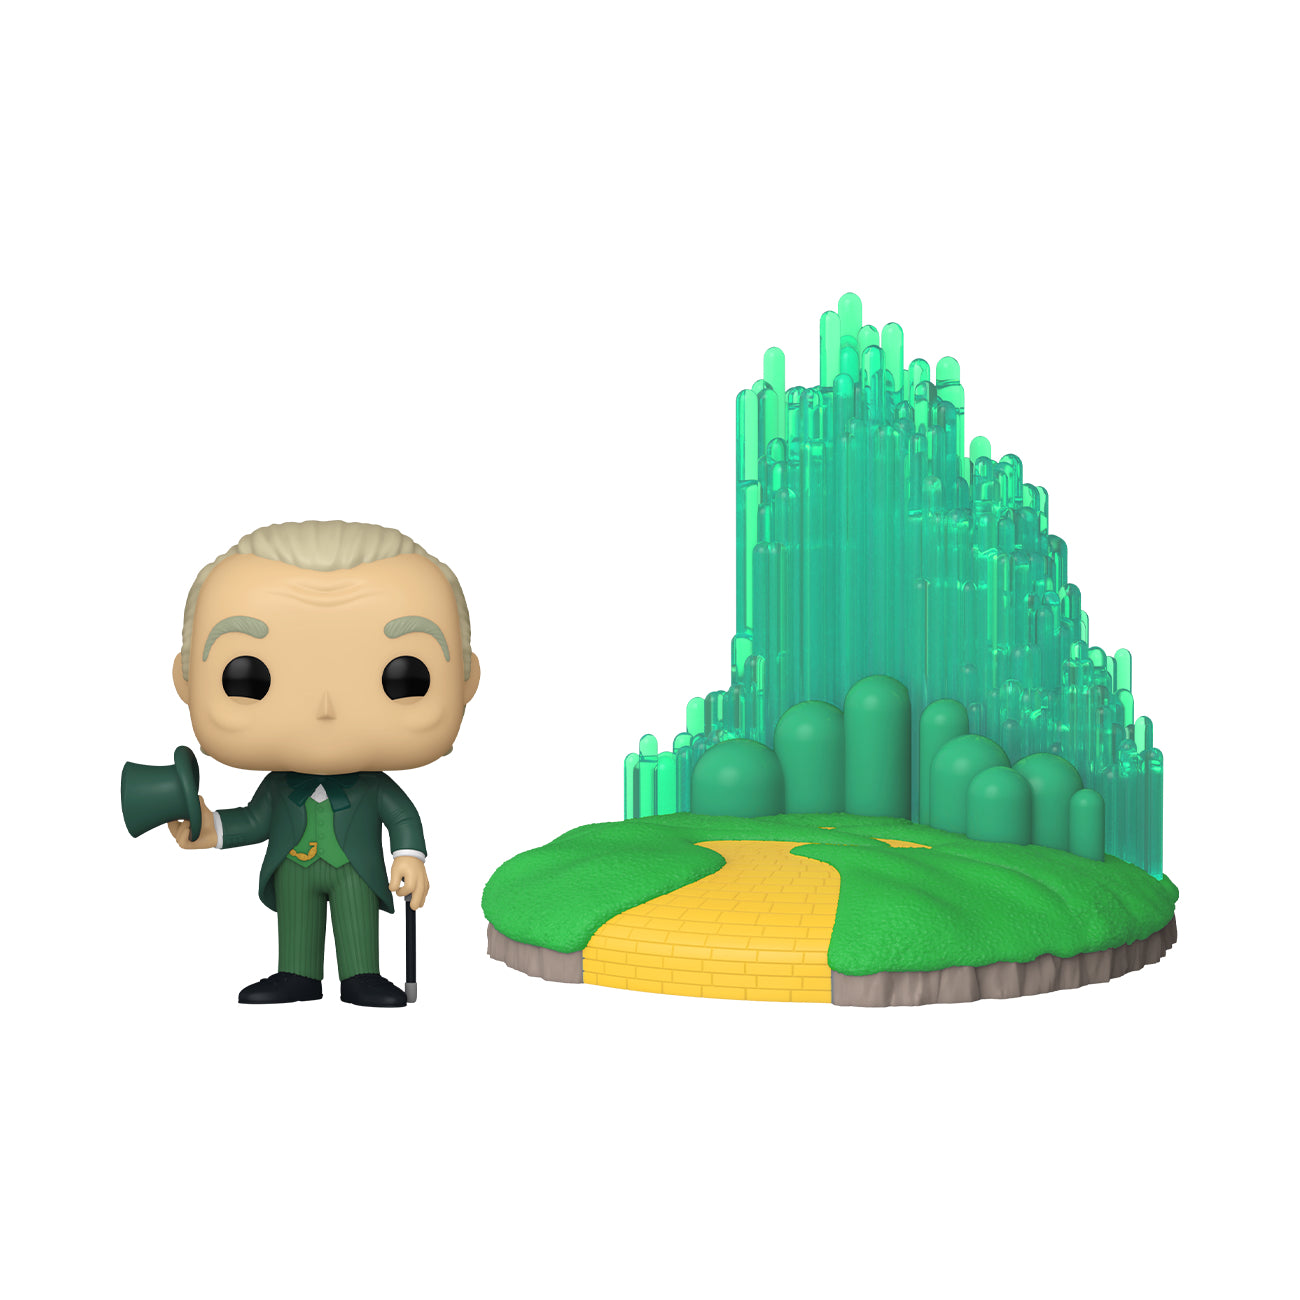 Funko Pop! Town: The Wizard of Oz 85th Anniversary Wizard with Emerald City Vinyl Figure